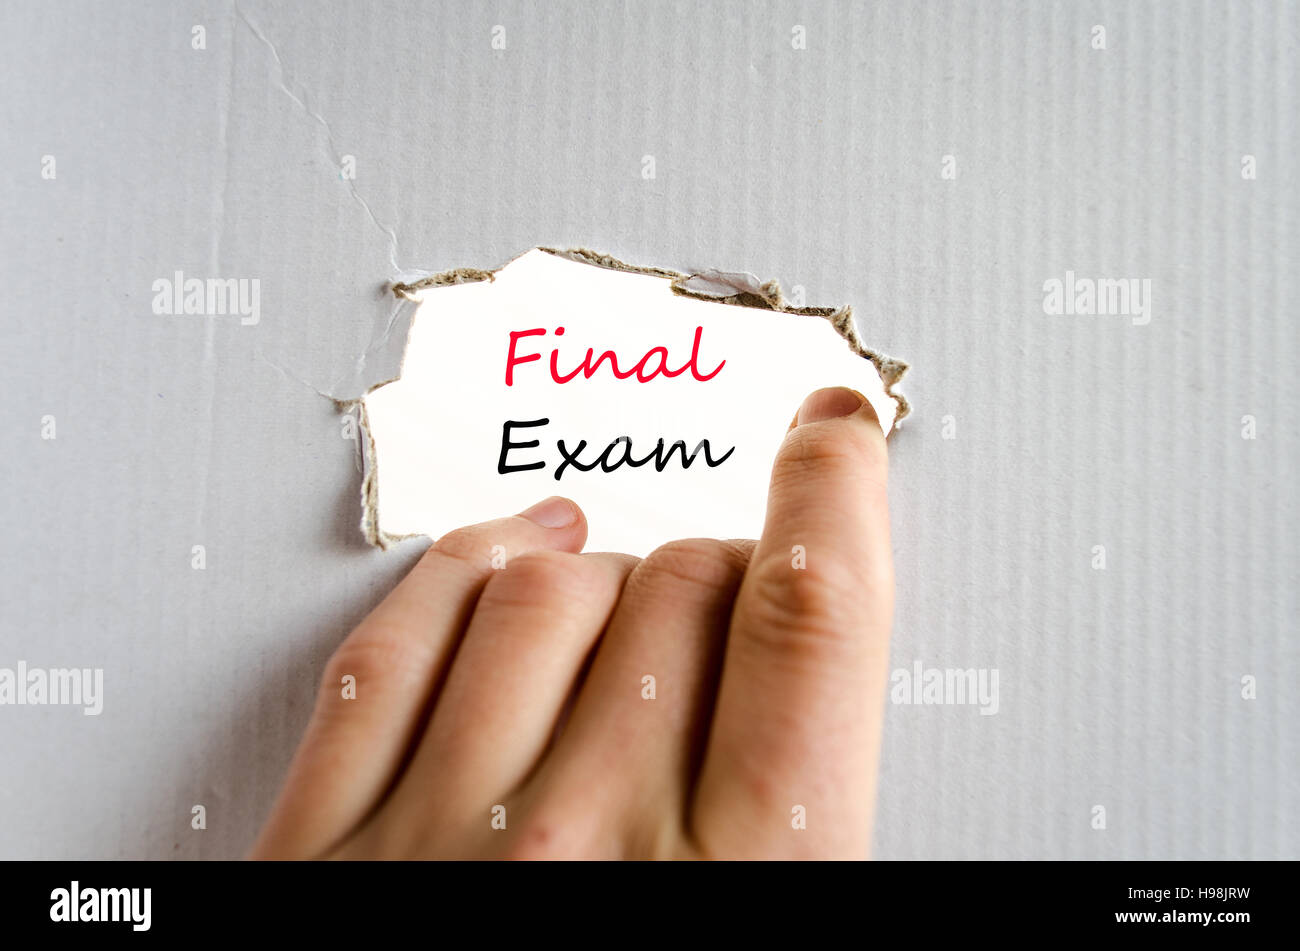 Final exam text concept isolated over white background Stock Photo ...